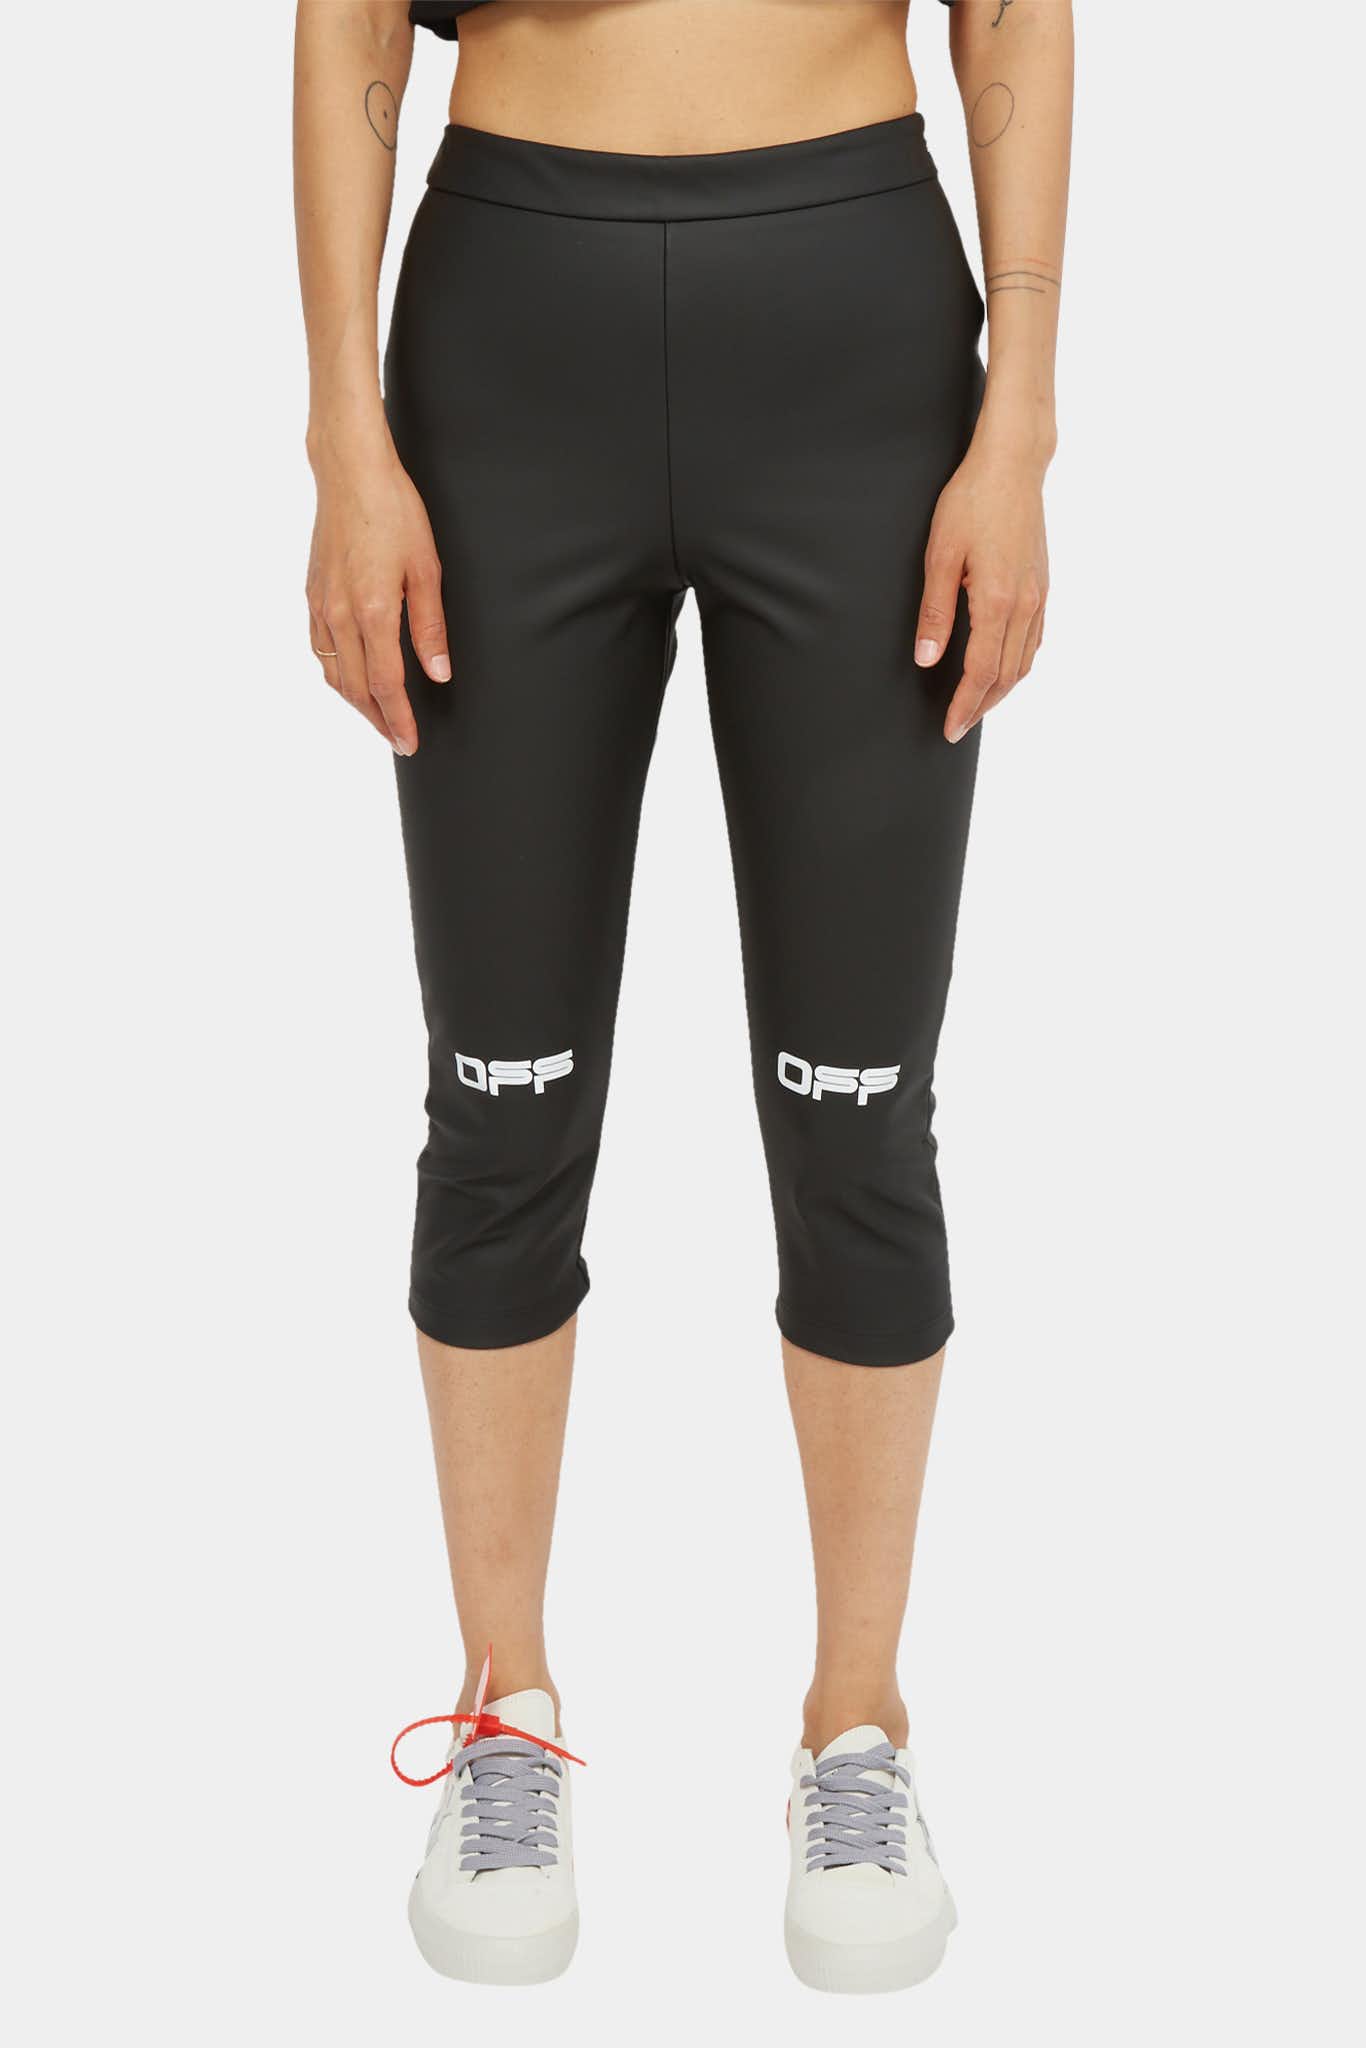 Off-White Legging Black Cropped with printed logo – LECLAIREUR